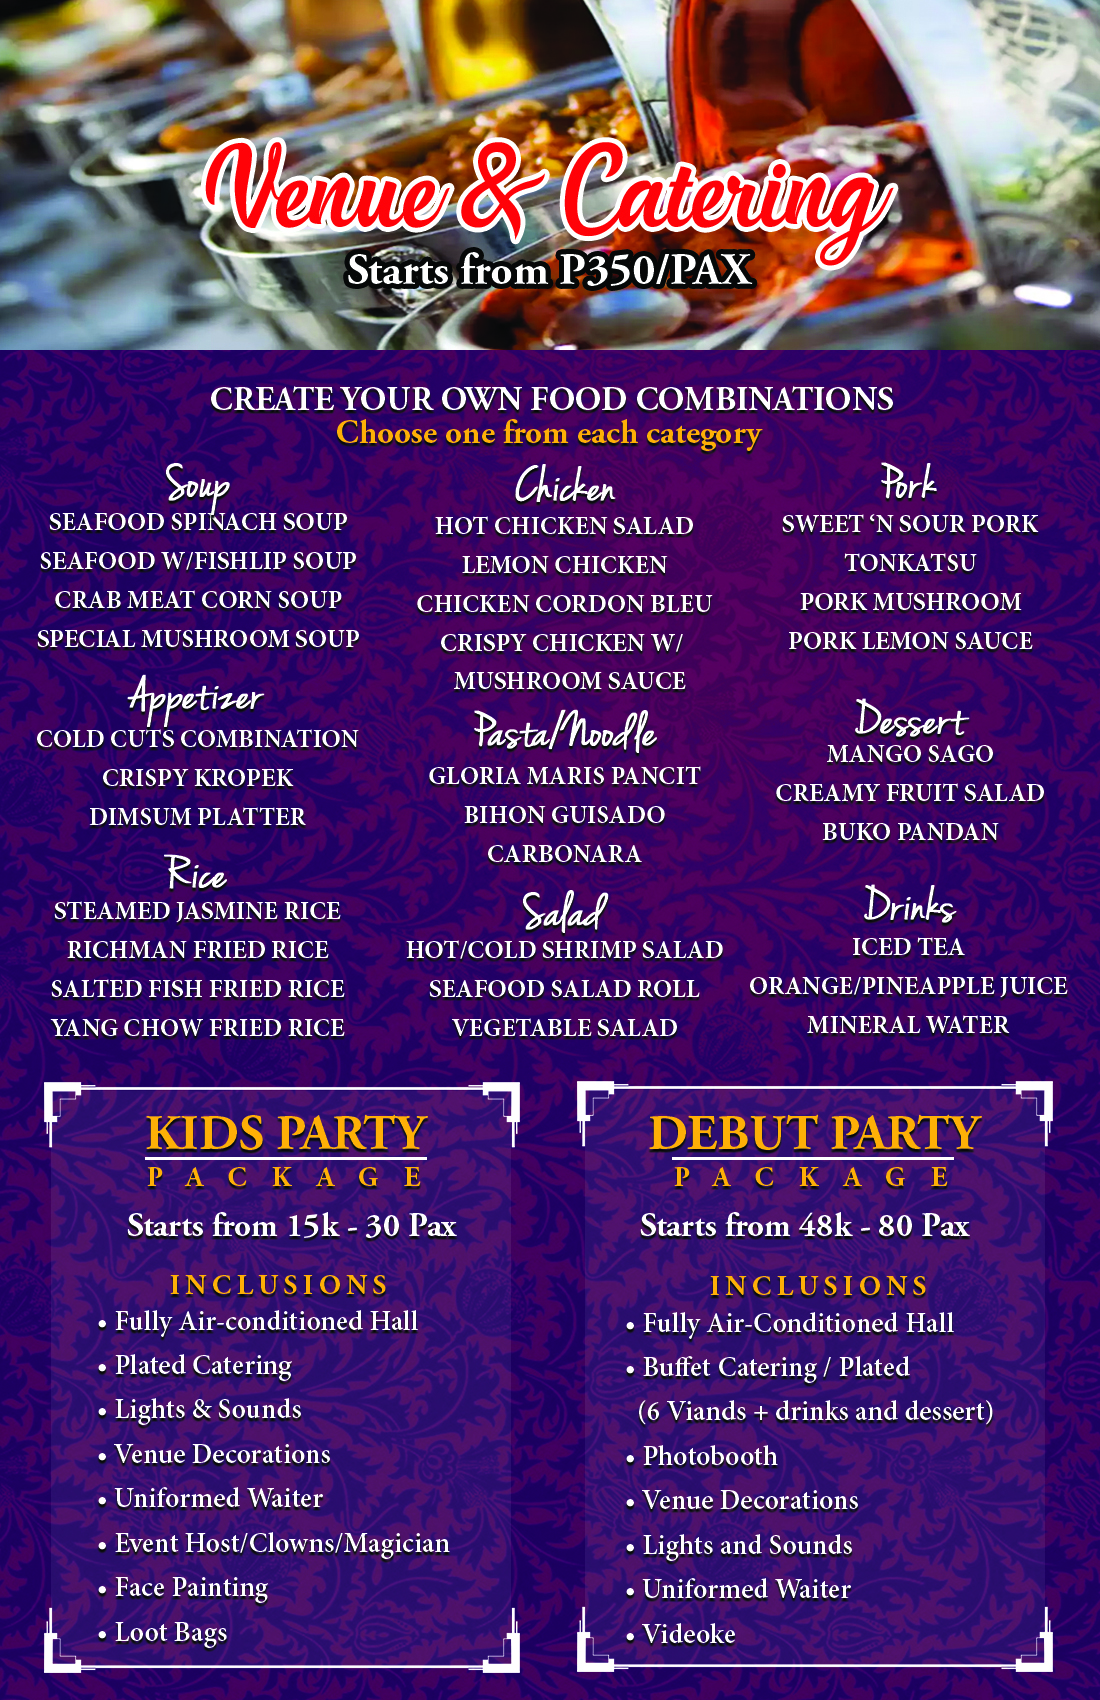 kids Party and Debut Party Packages